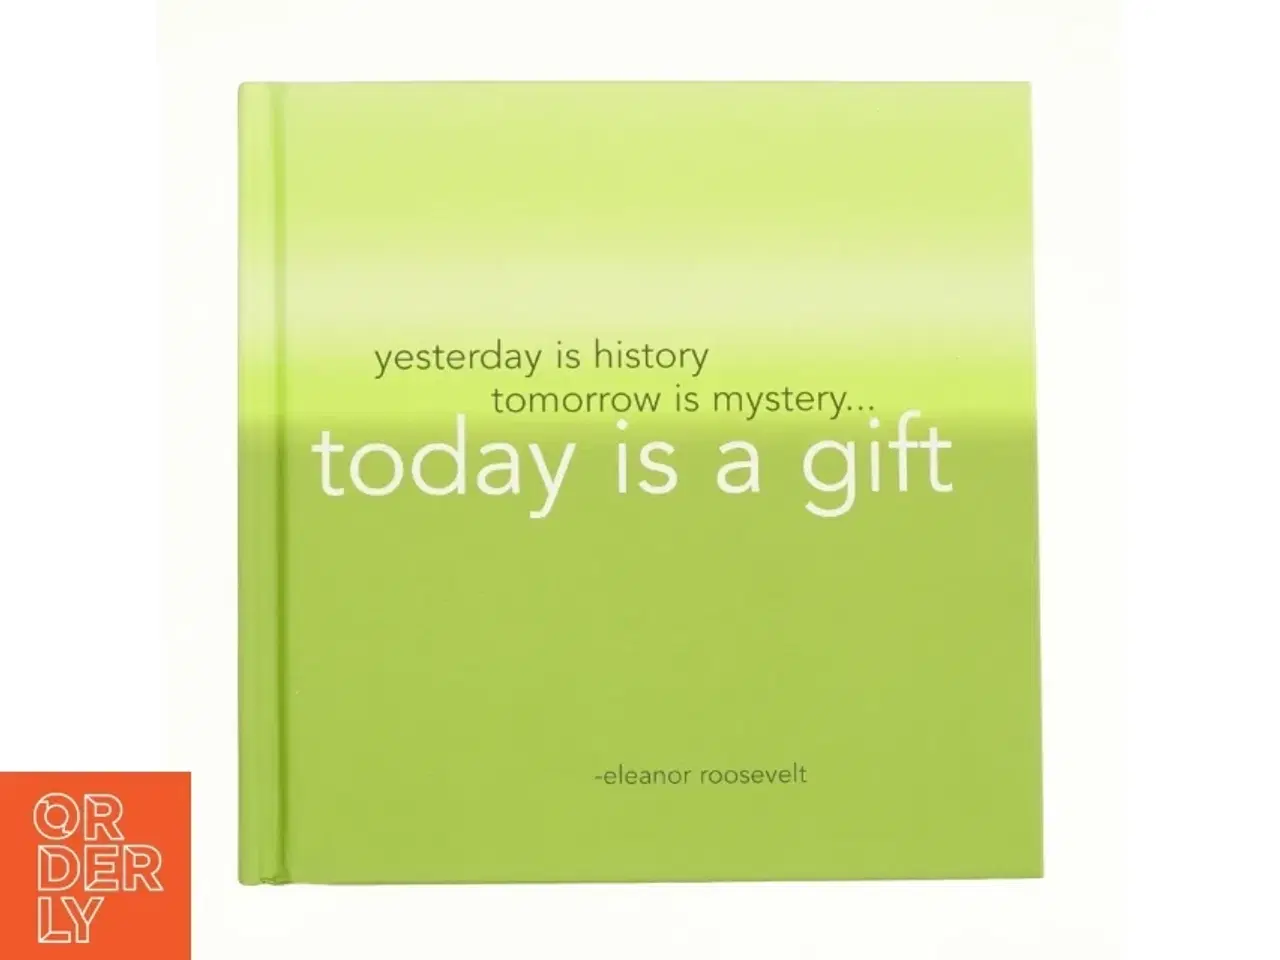 Billede 1 - Yesterday is history, tomorrow is mystery..., tody is a gift af Eleanor roosevelt fra Bog